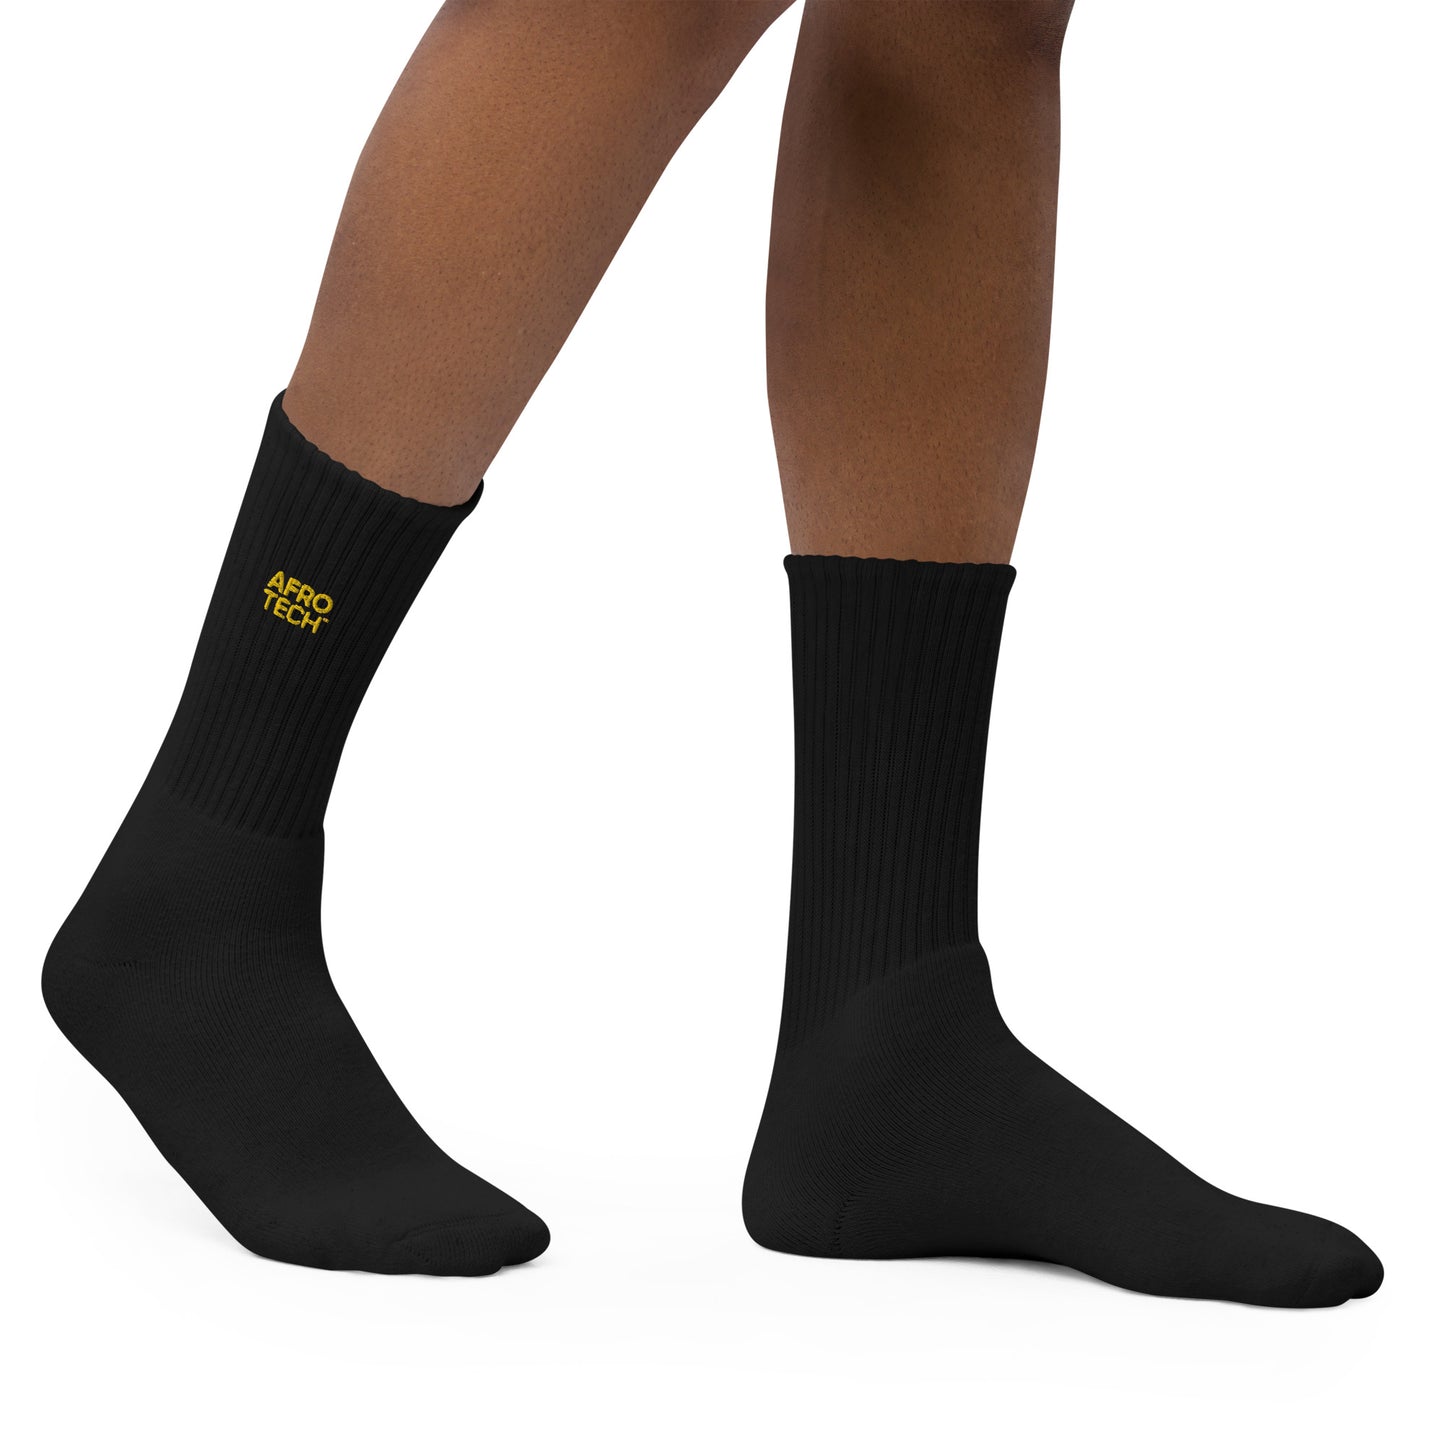 AFROTECH Embroidered socks